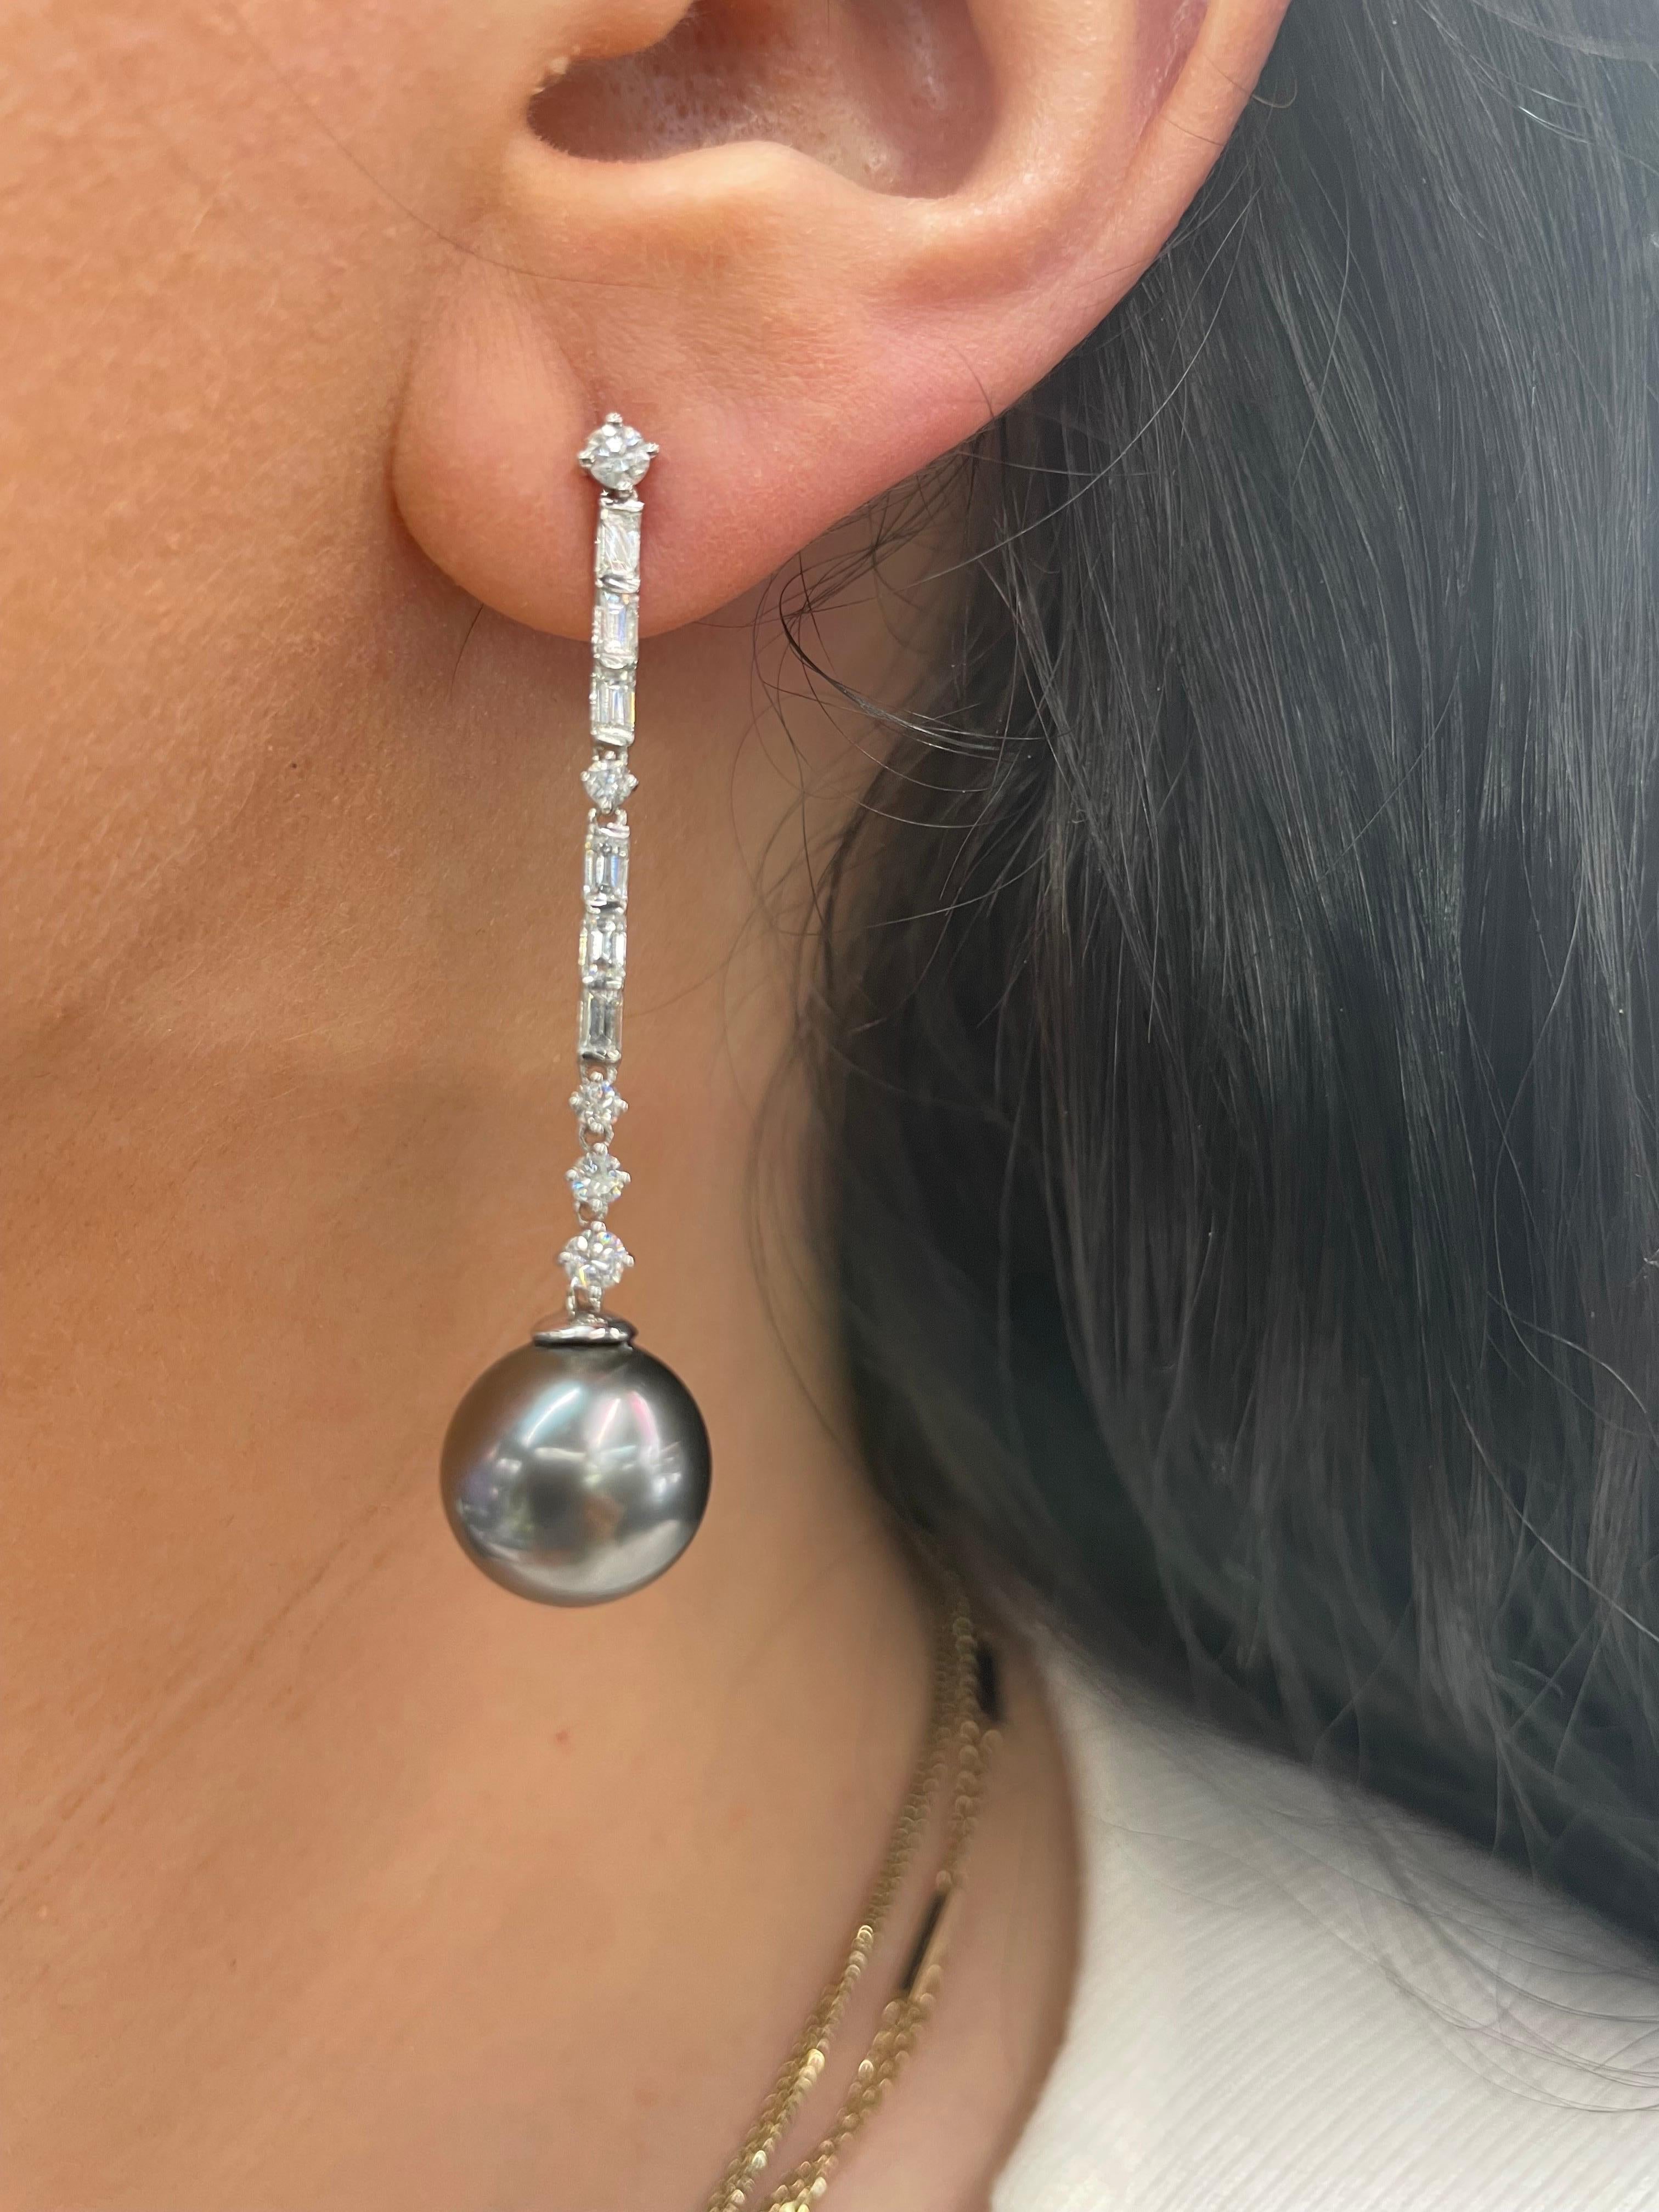 18 Karat White gold drop earrings featuring two Tahitian Pearls measuring 12-13 MM and 12 baguettes, 0.78 carats, and 10 round brilliants weighing 0.59 carats.
Pearls can be changed to South Sea, Pink Freshwater or Golden. 
DM for more information. 